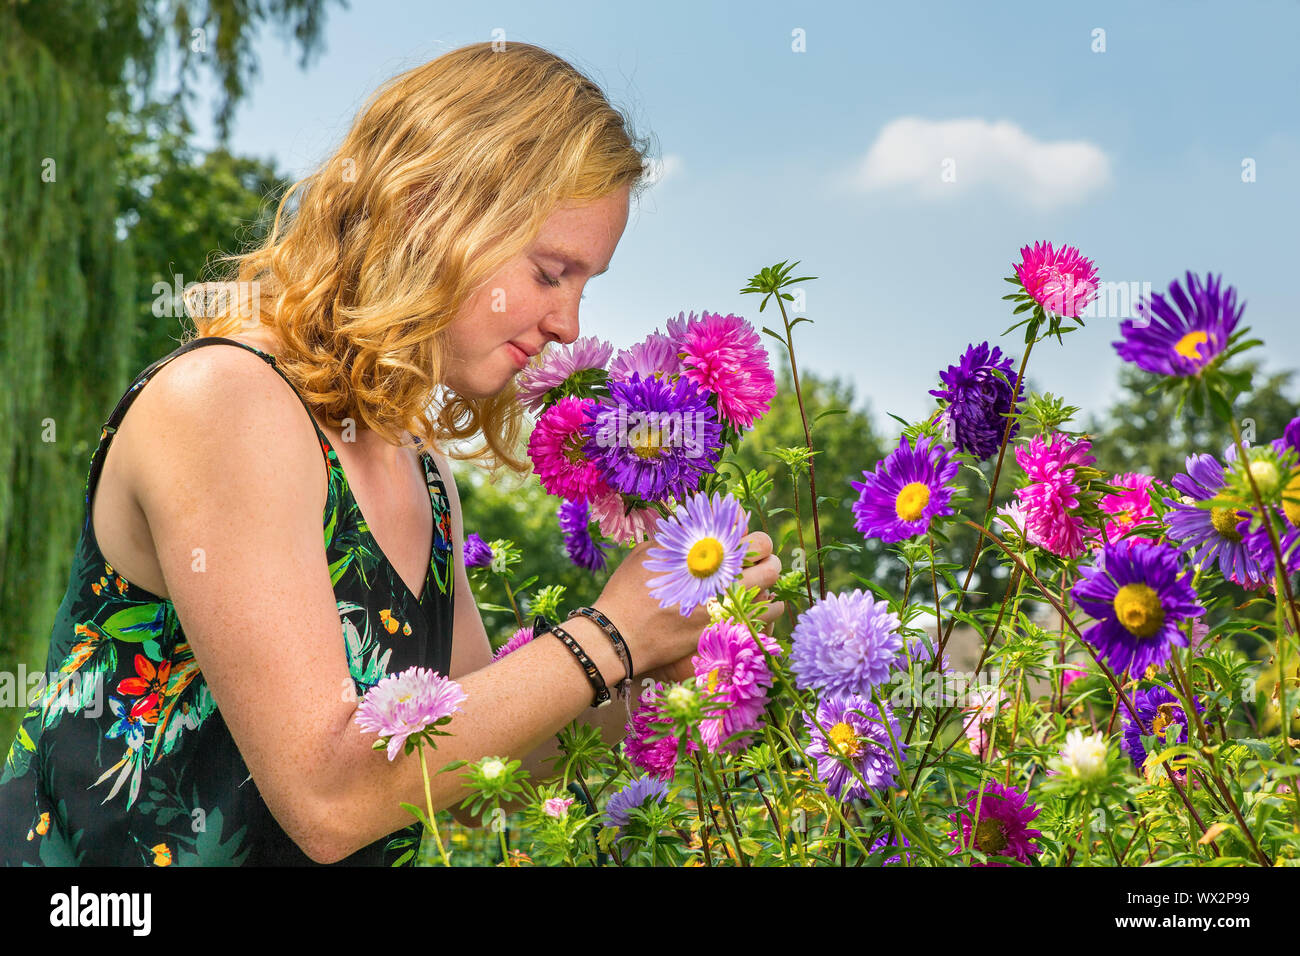 Young woman smelling summer flowers in garden Stock Photo